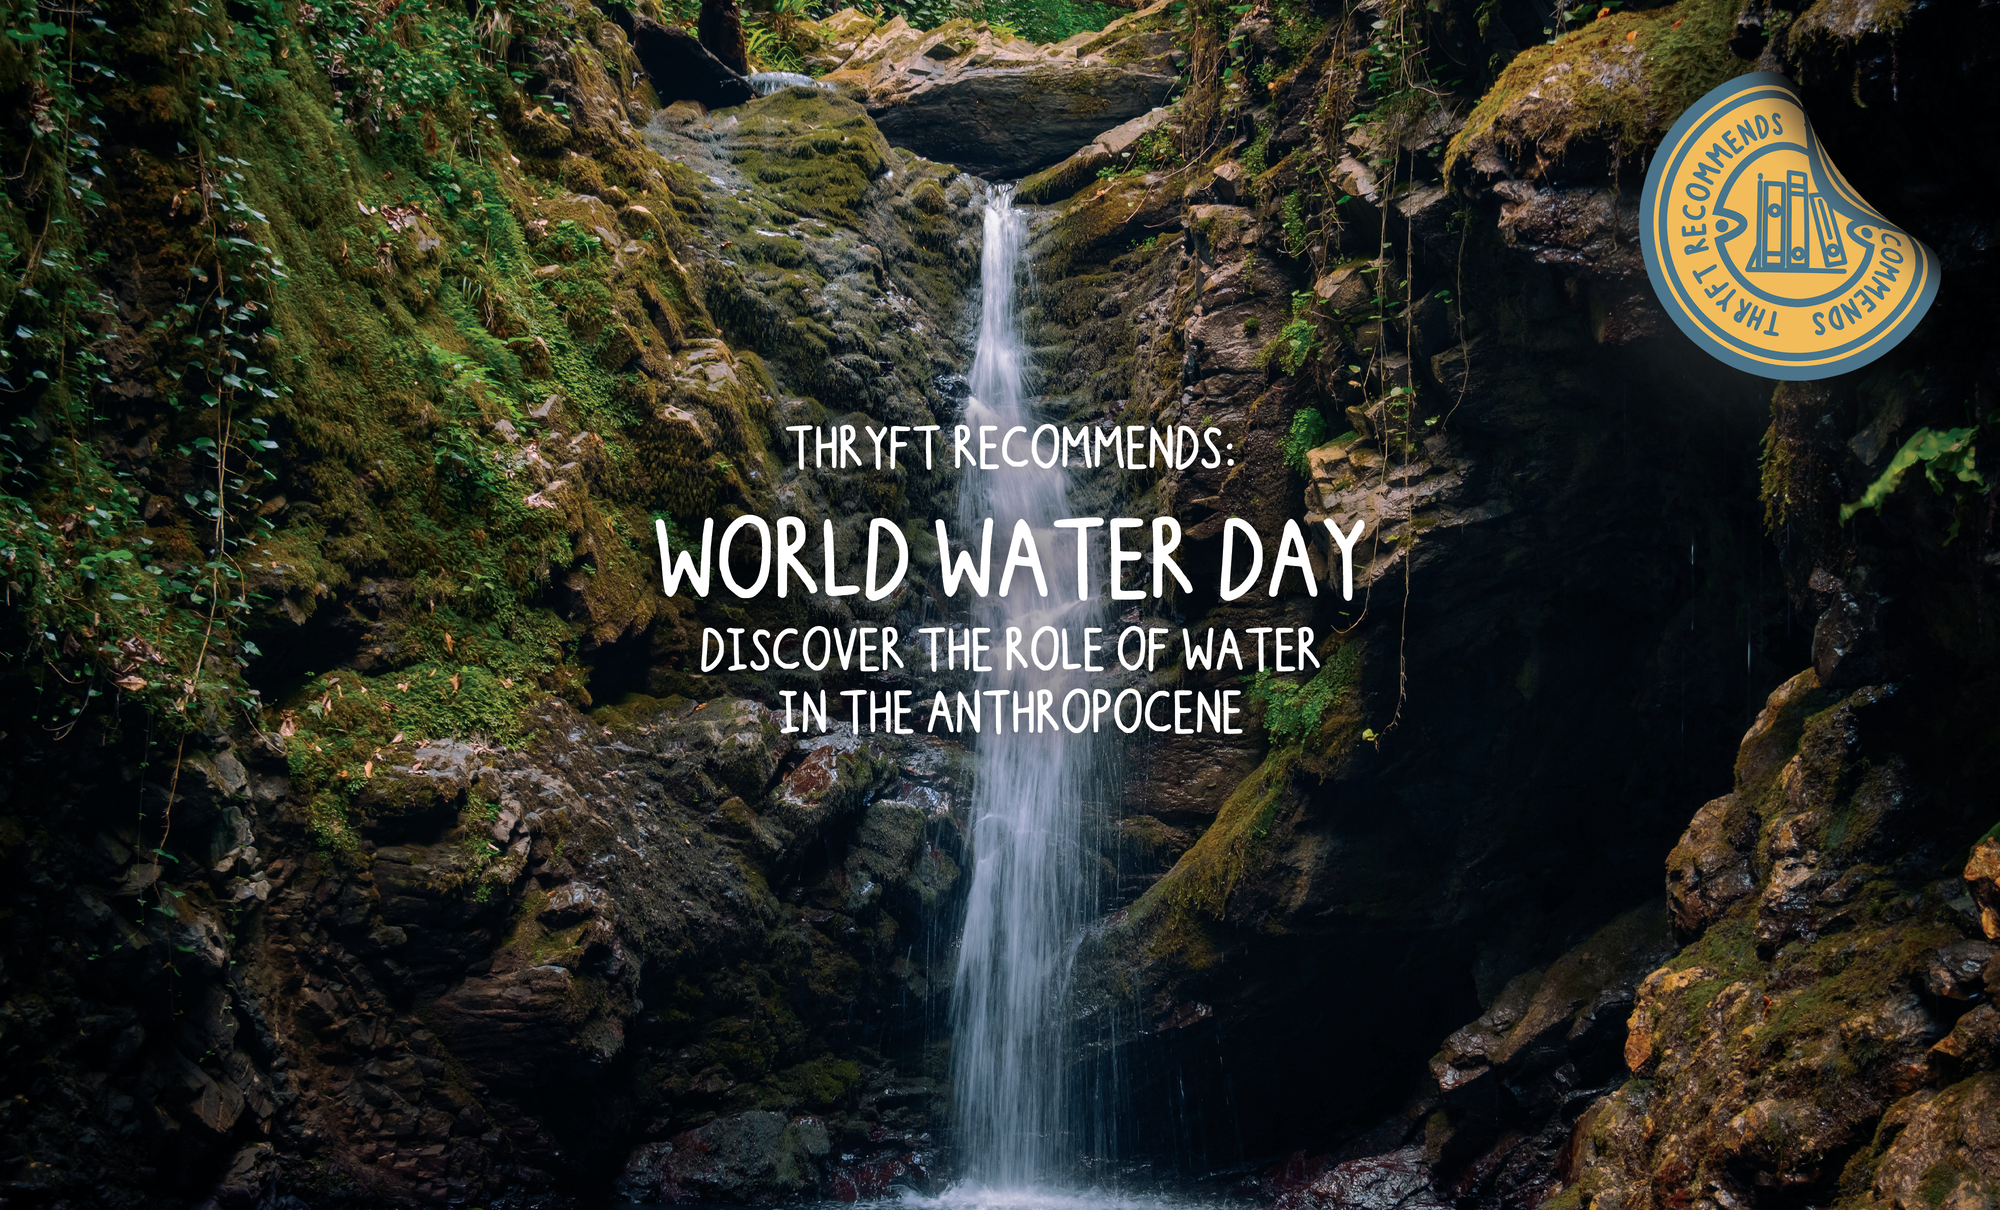 World Water Day: Discover the Role of Water in the Anthropocene